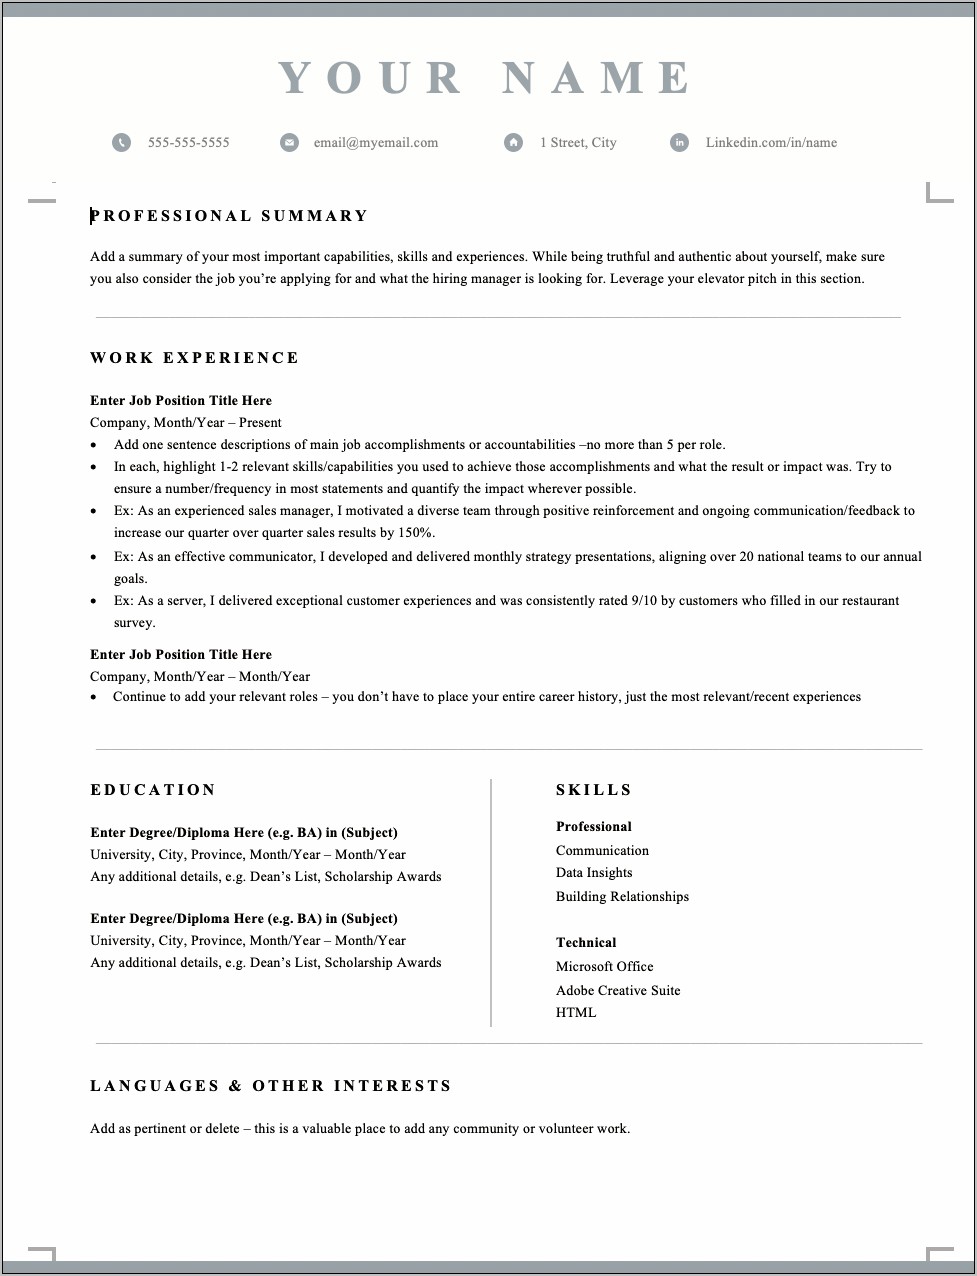 Canadian Working Holiday Visa Resume Template